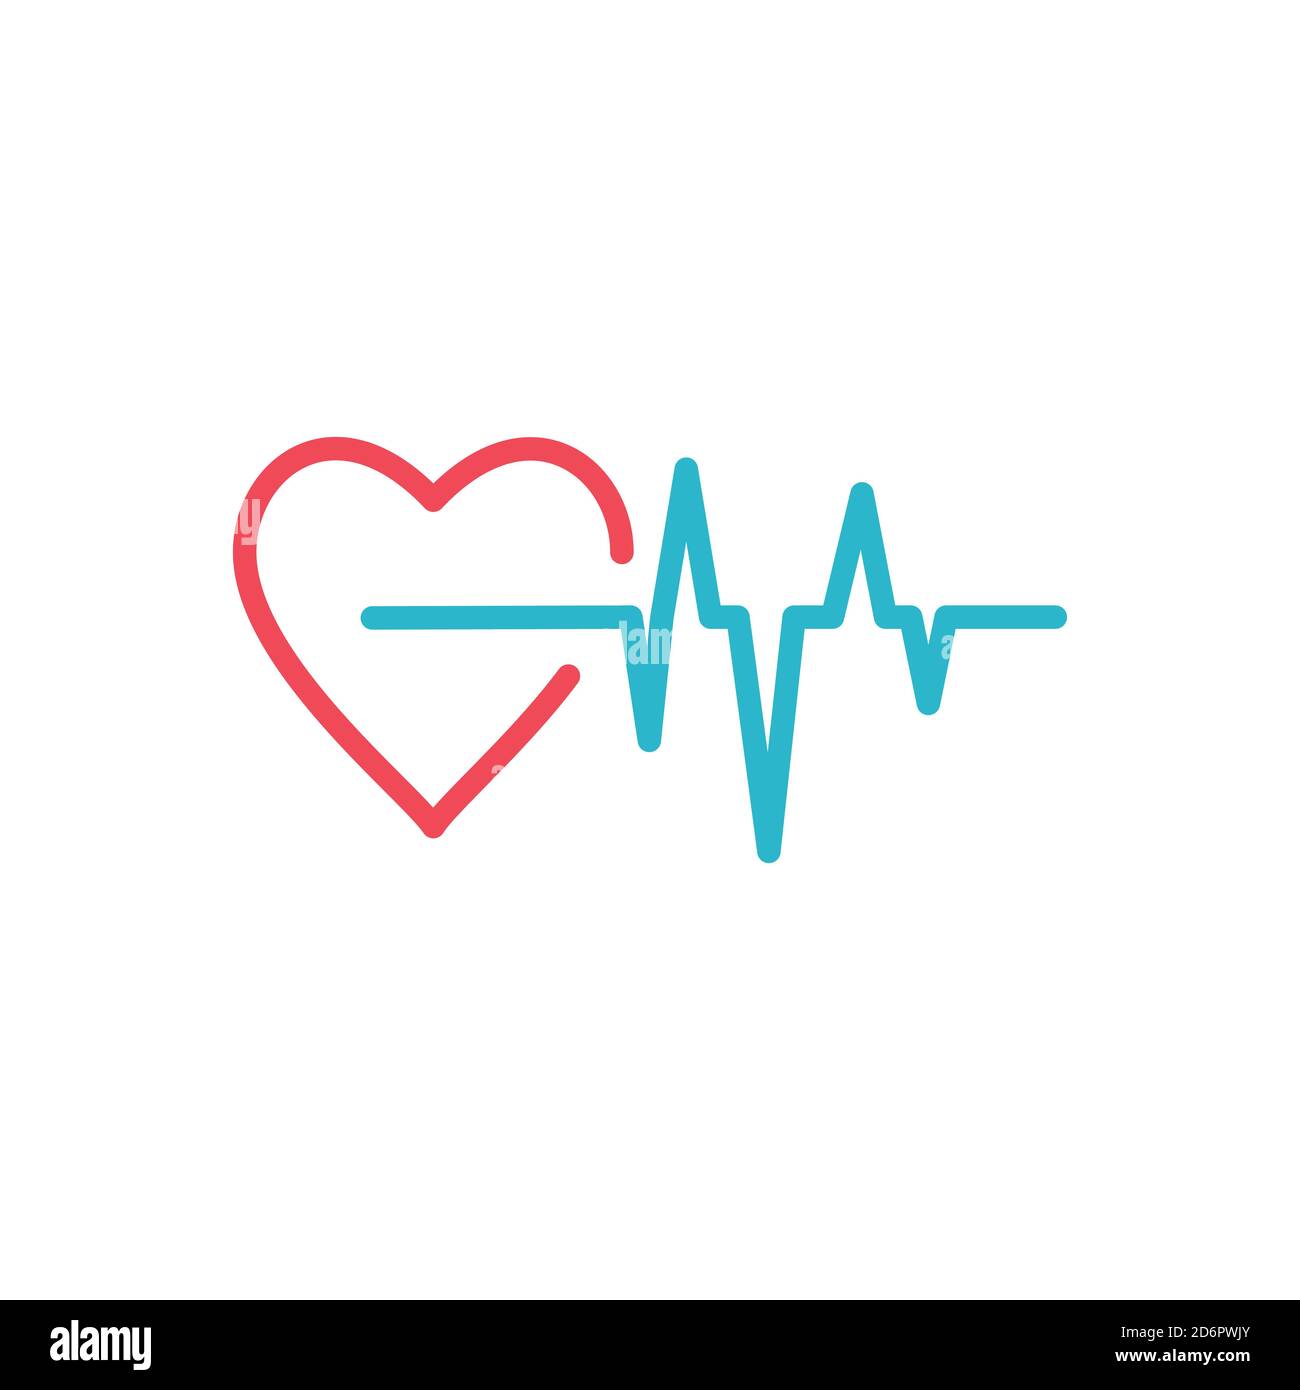 Red heart with ekg medical design. Stock vector illustration isolated on white background. Stock Vector